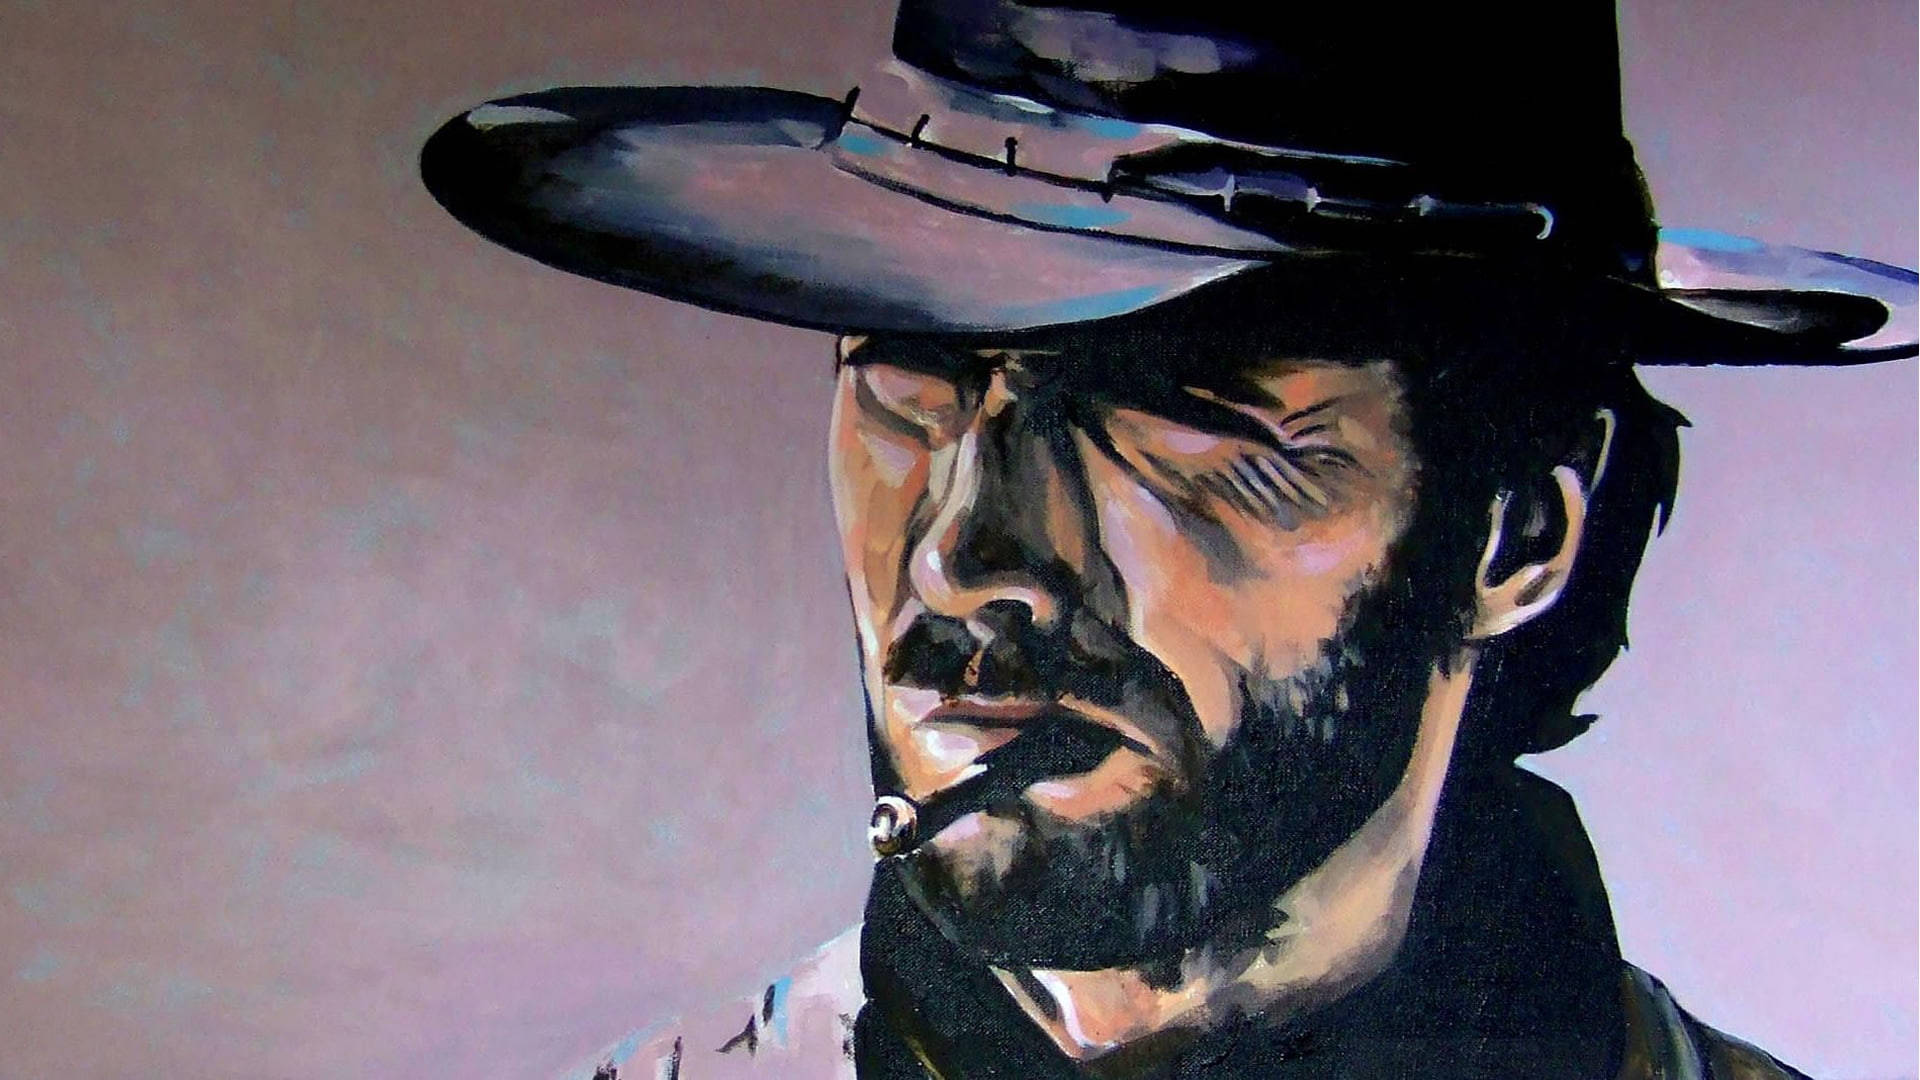 Download Clint Eastwood Fistful Of Dollars Painting Wallpaper | Wallpapers .com